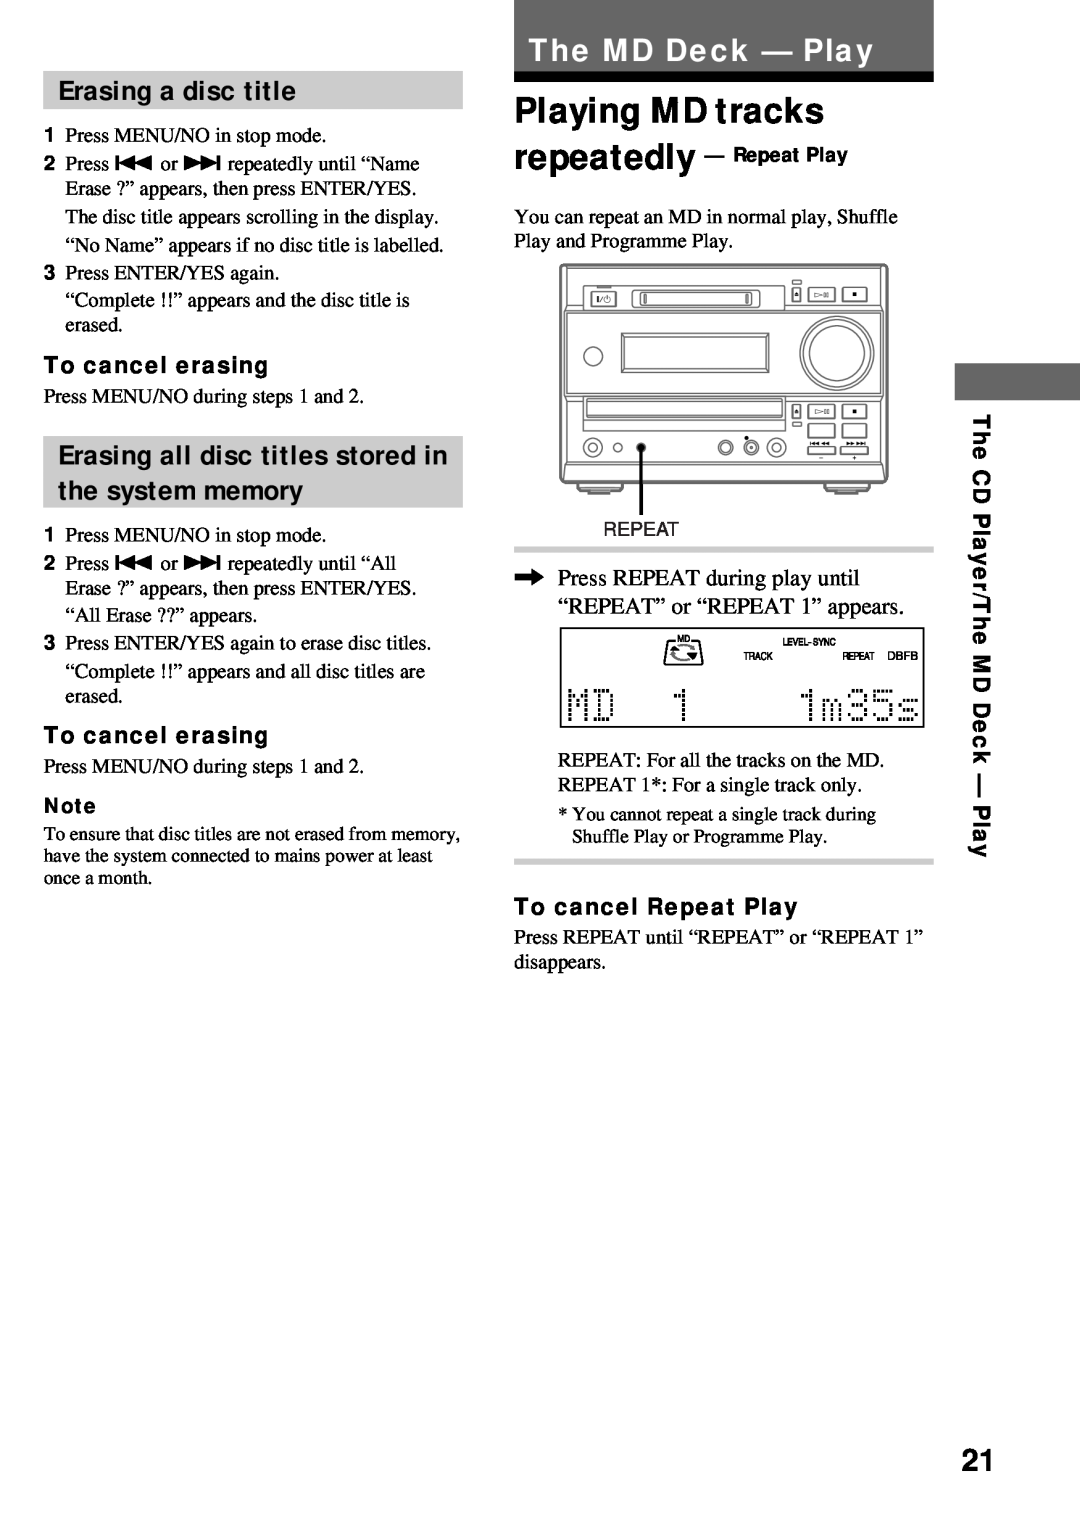 Sony DHC-MD373 manual Playing MD tracks, Erasing a disc title, The MD Deck - Play, Erasing all disc titles stored in 